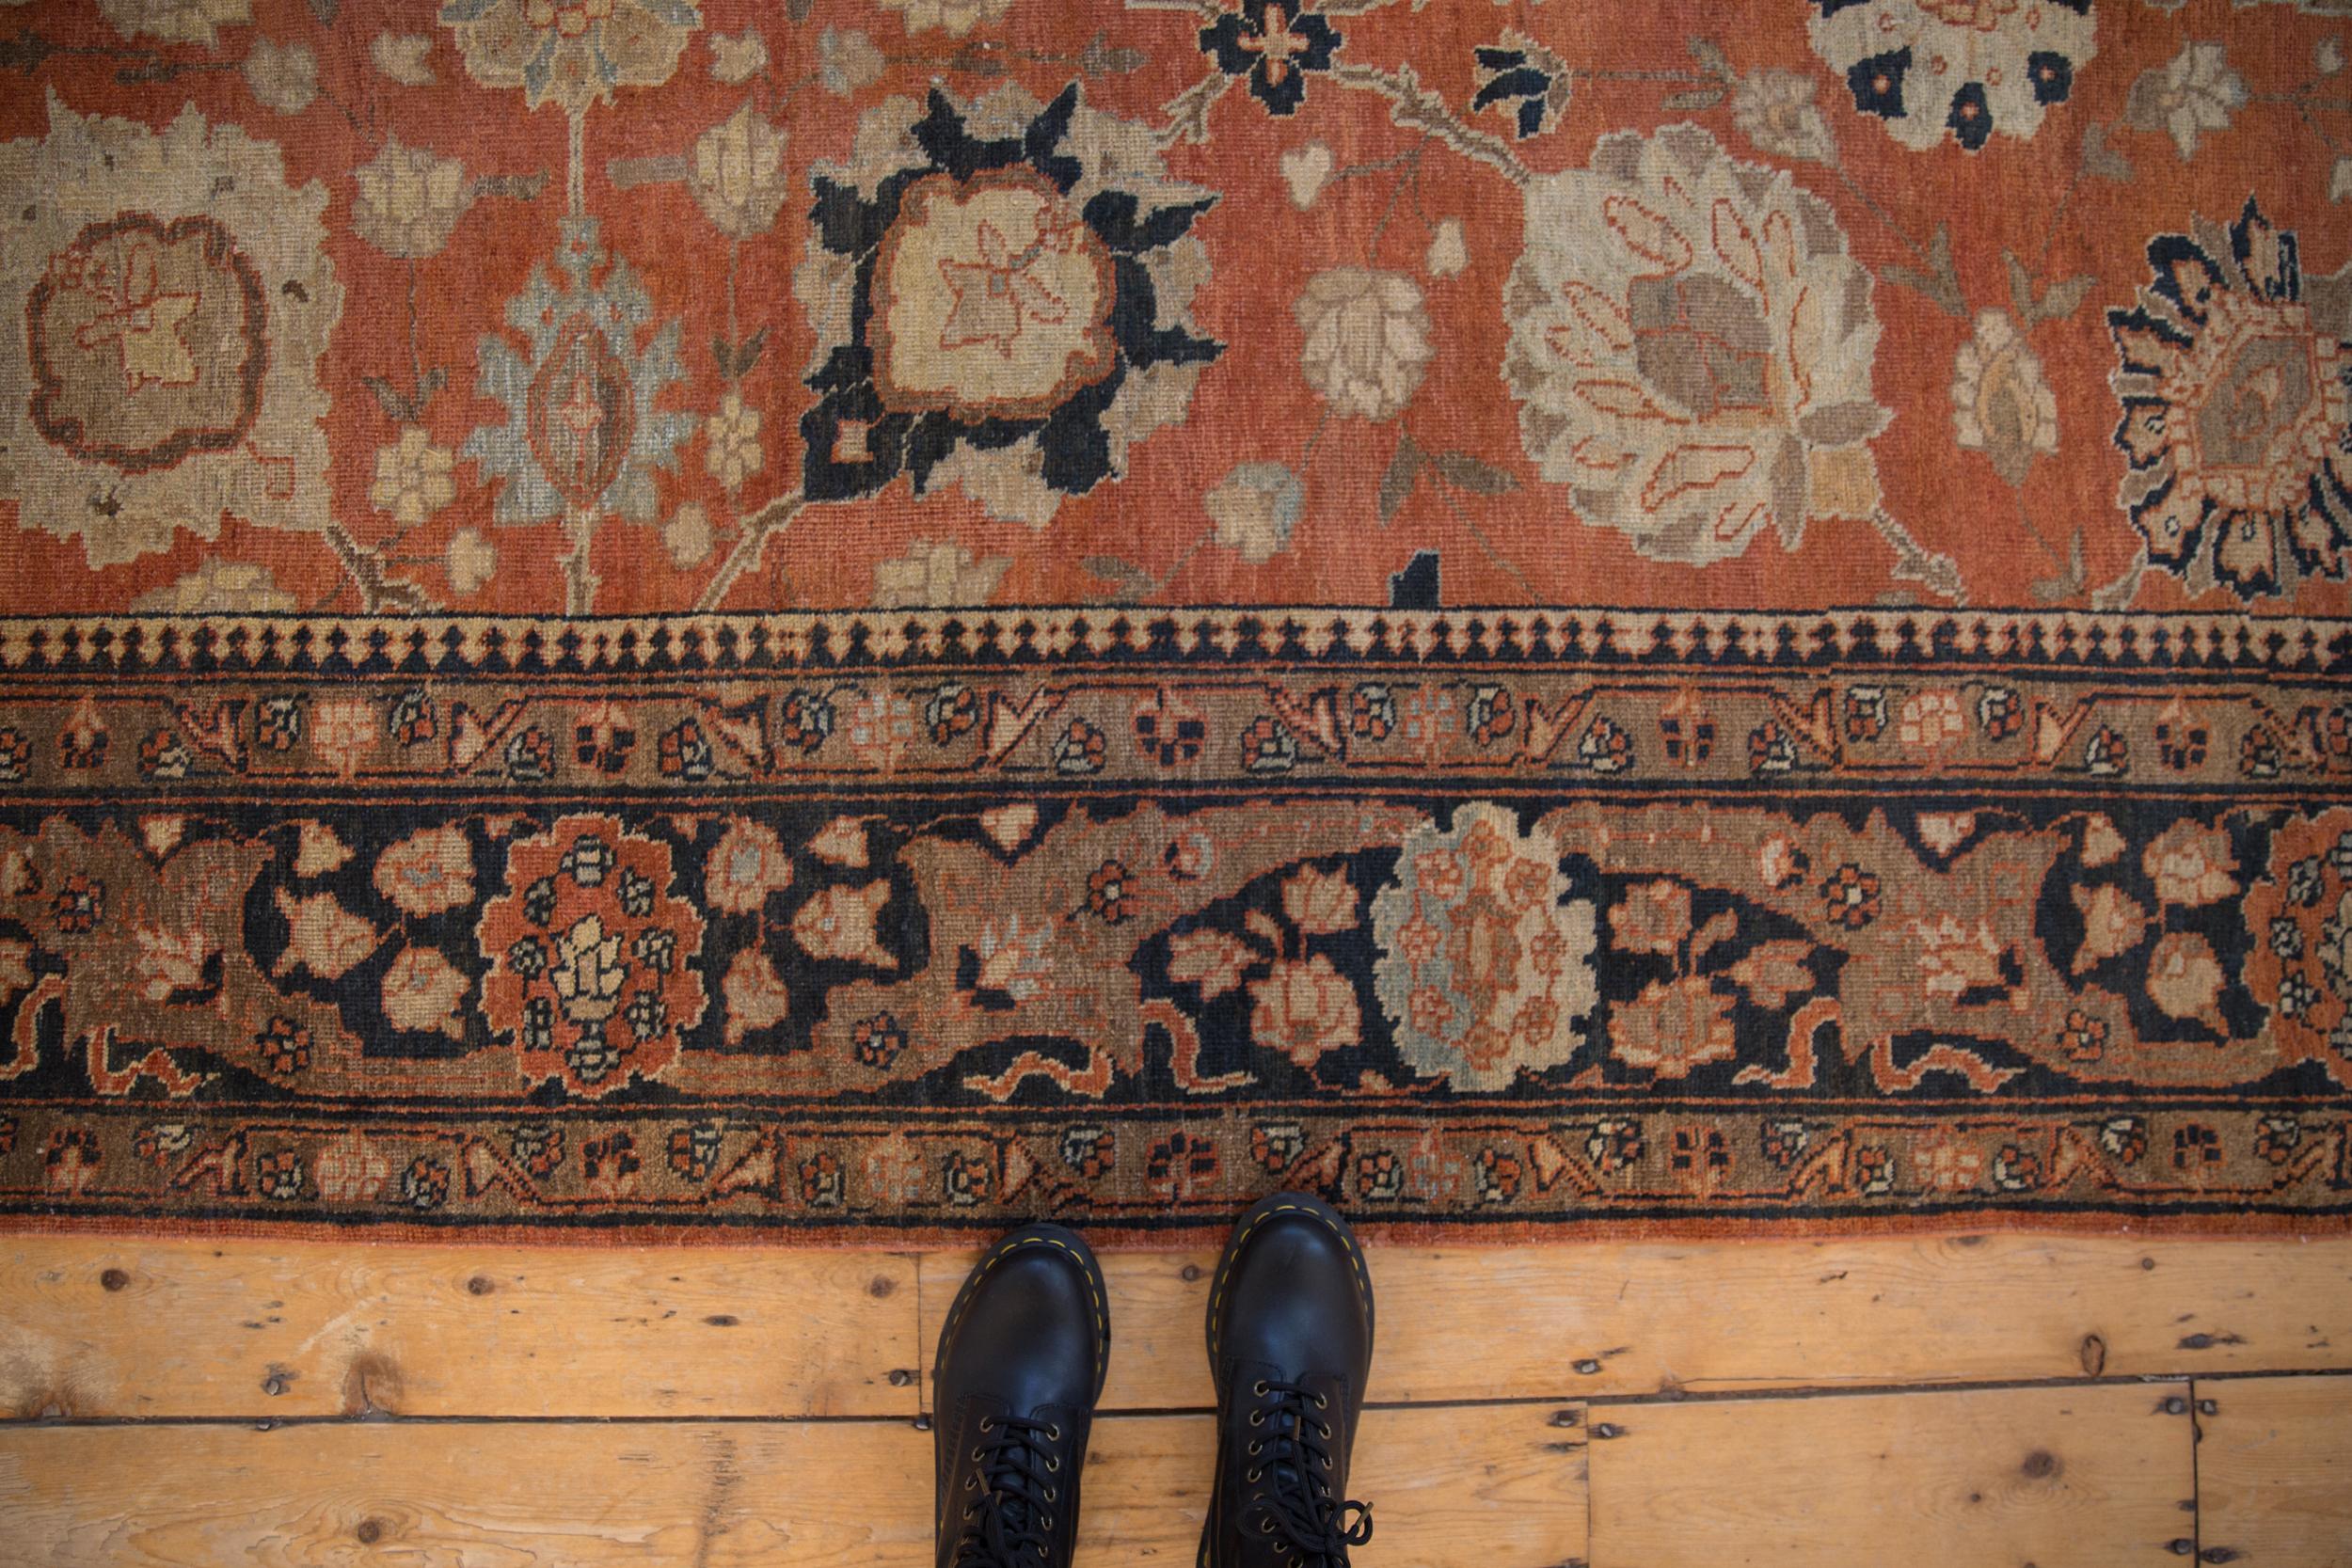 :: Covered field in palmettes floral cross sections, lotus flowers and more, inspired by Safavid era carpets of centuries old Persian design. Colors and shades include: Rust, charcoal navy blue, dusty powdered blue, dark beige, bronze brown, sand,